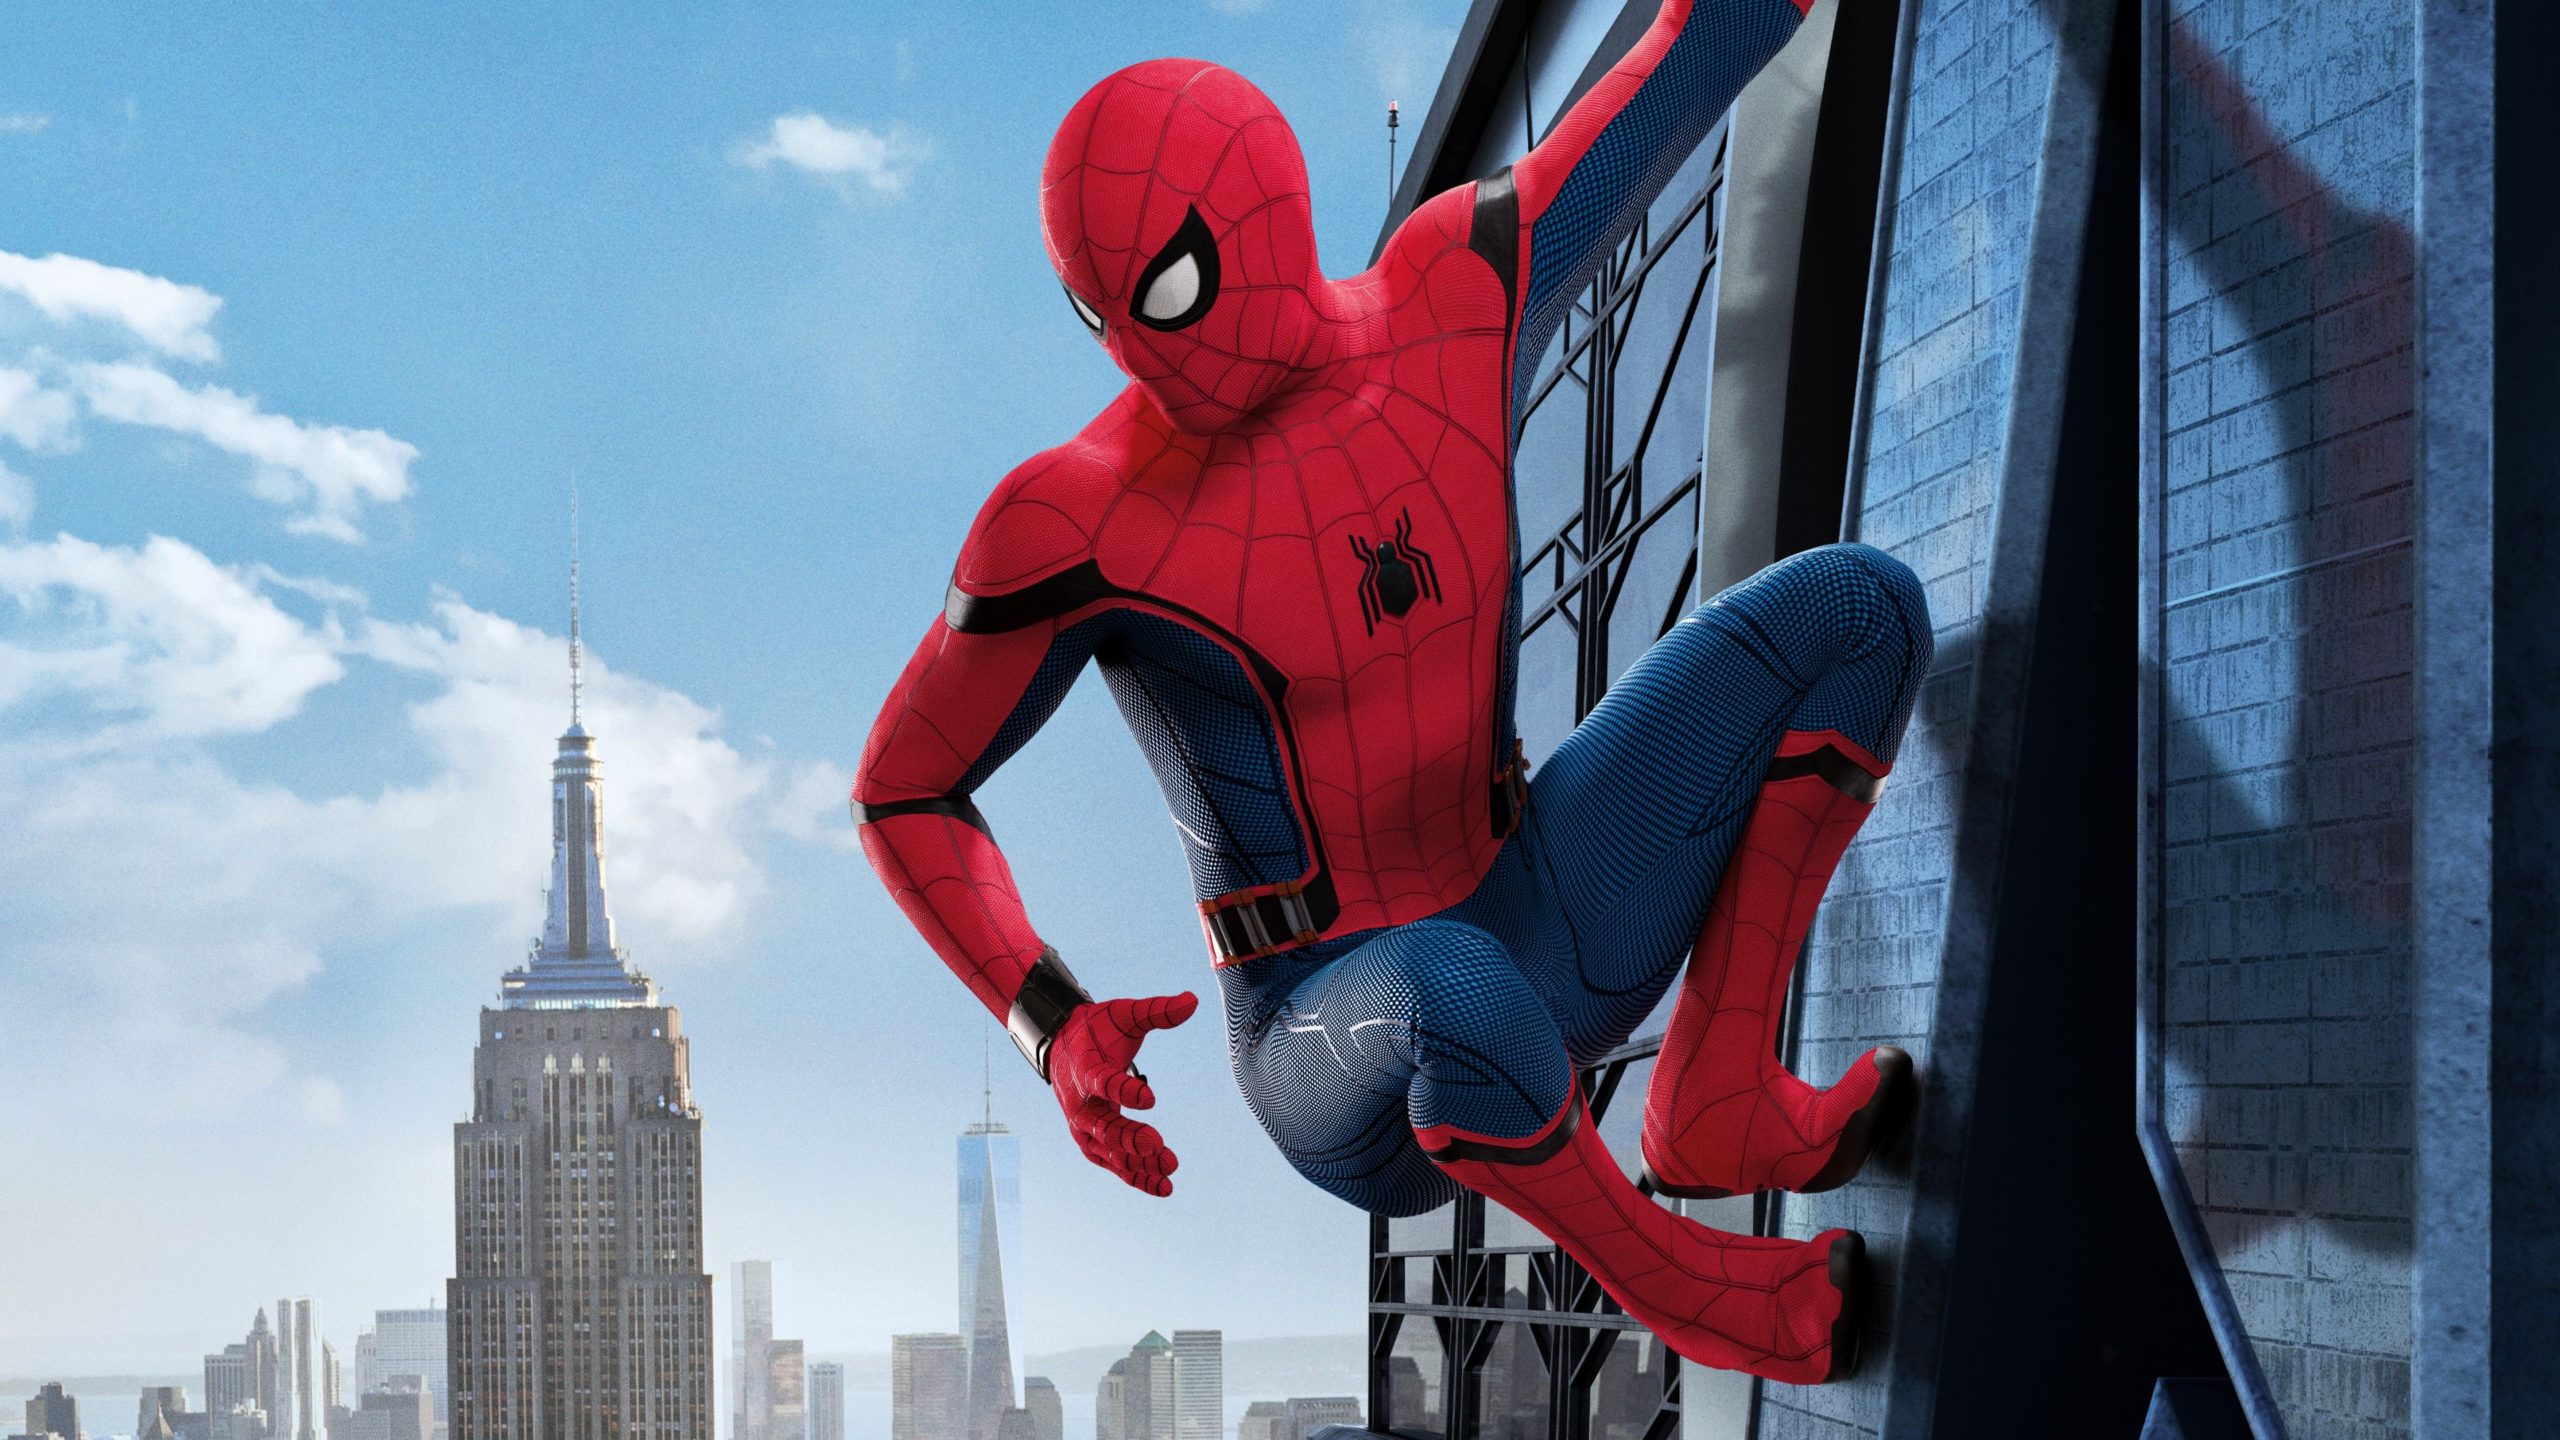 Previously Unannounced Spider-Man Tie-In Gets October 2021 Release Date From Sony